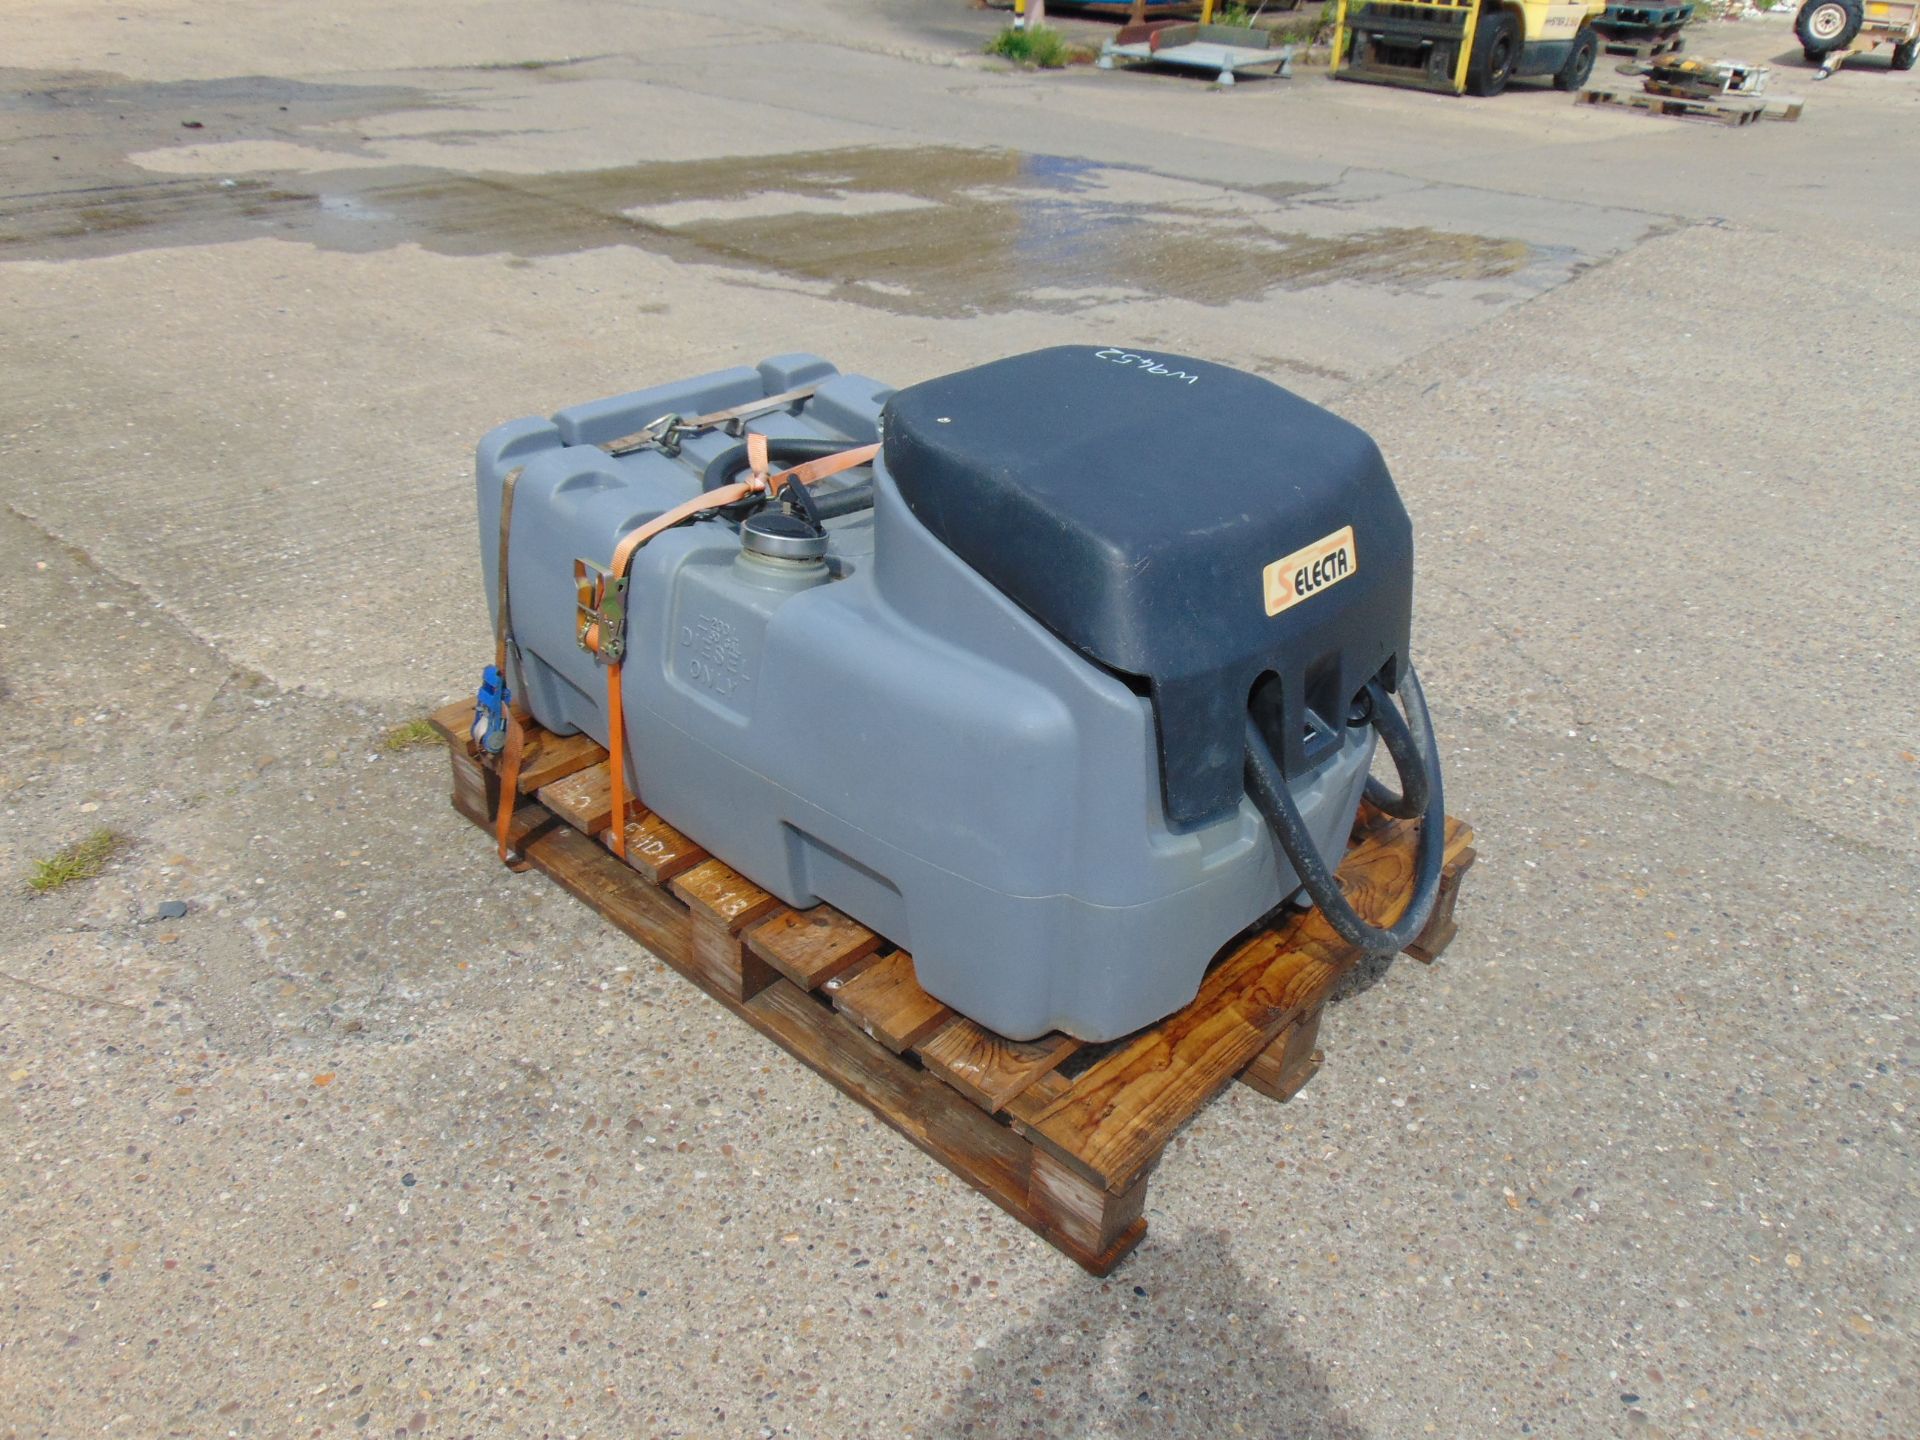 Selecta 200 Litre 50 Gall Portable Refuel Tank c/w 12Volt Pump Hose and Automatic Refuelling Nozzle - Image 12 of 14